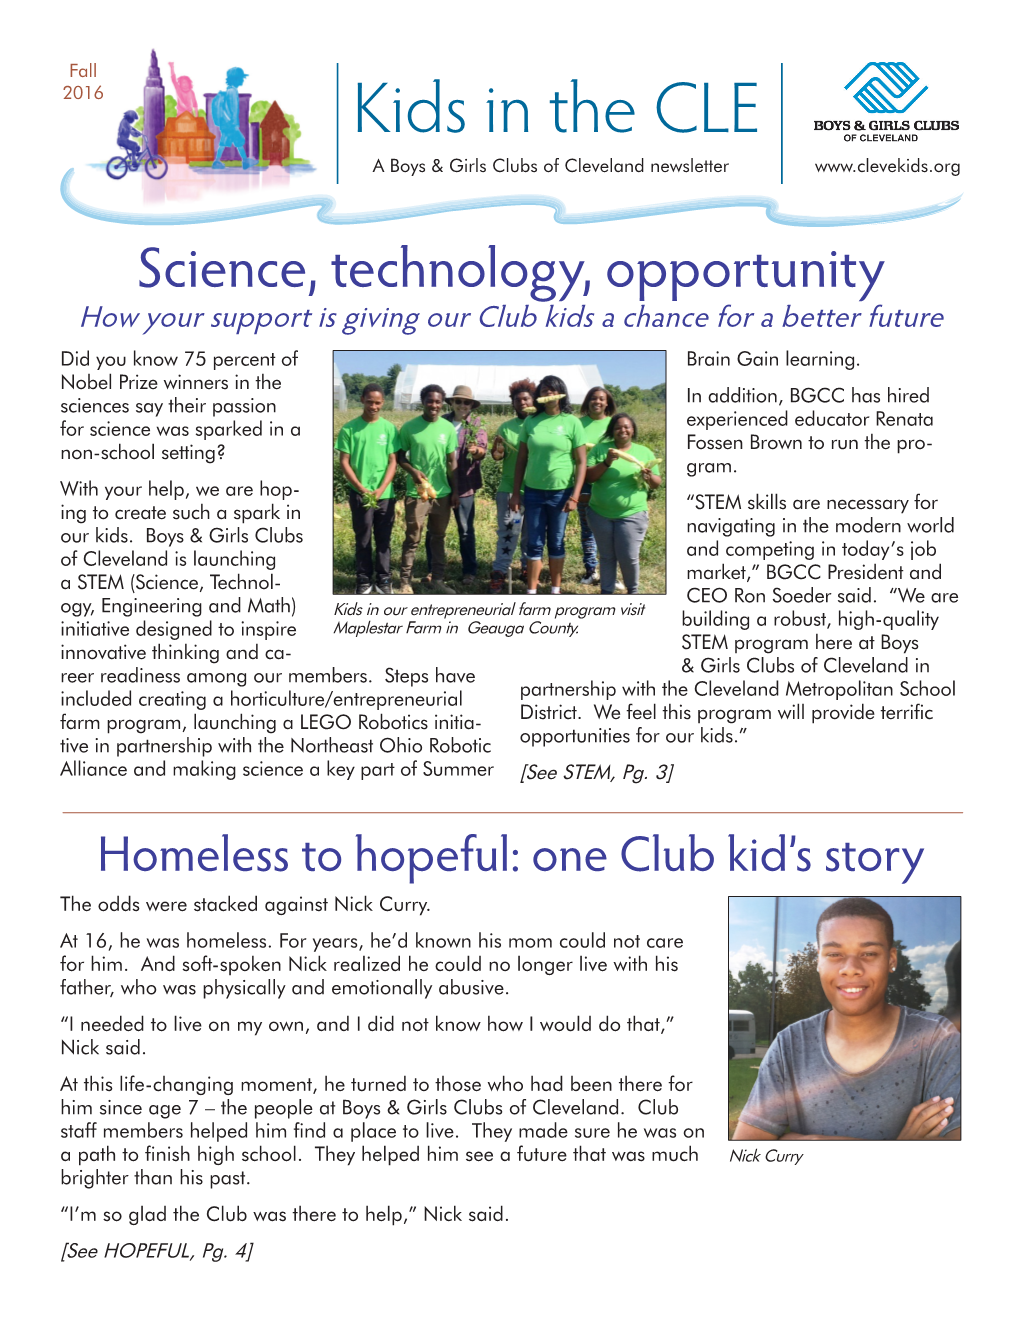 Kids in the CLE a Boys & Girls Clubs of Cleveland Newsletter